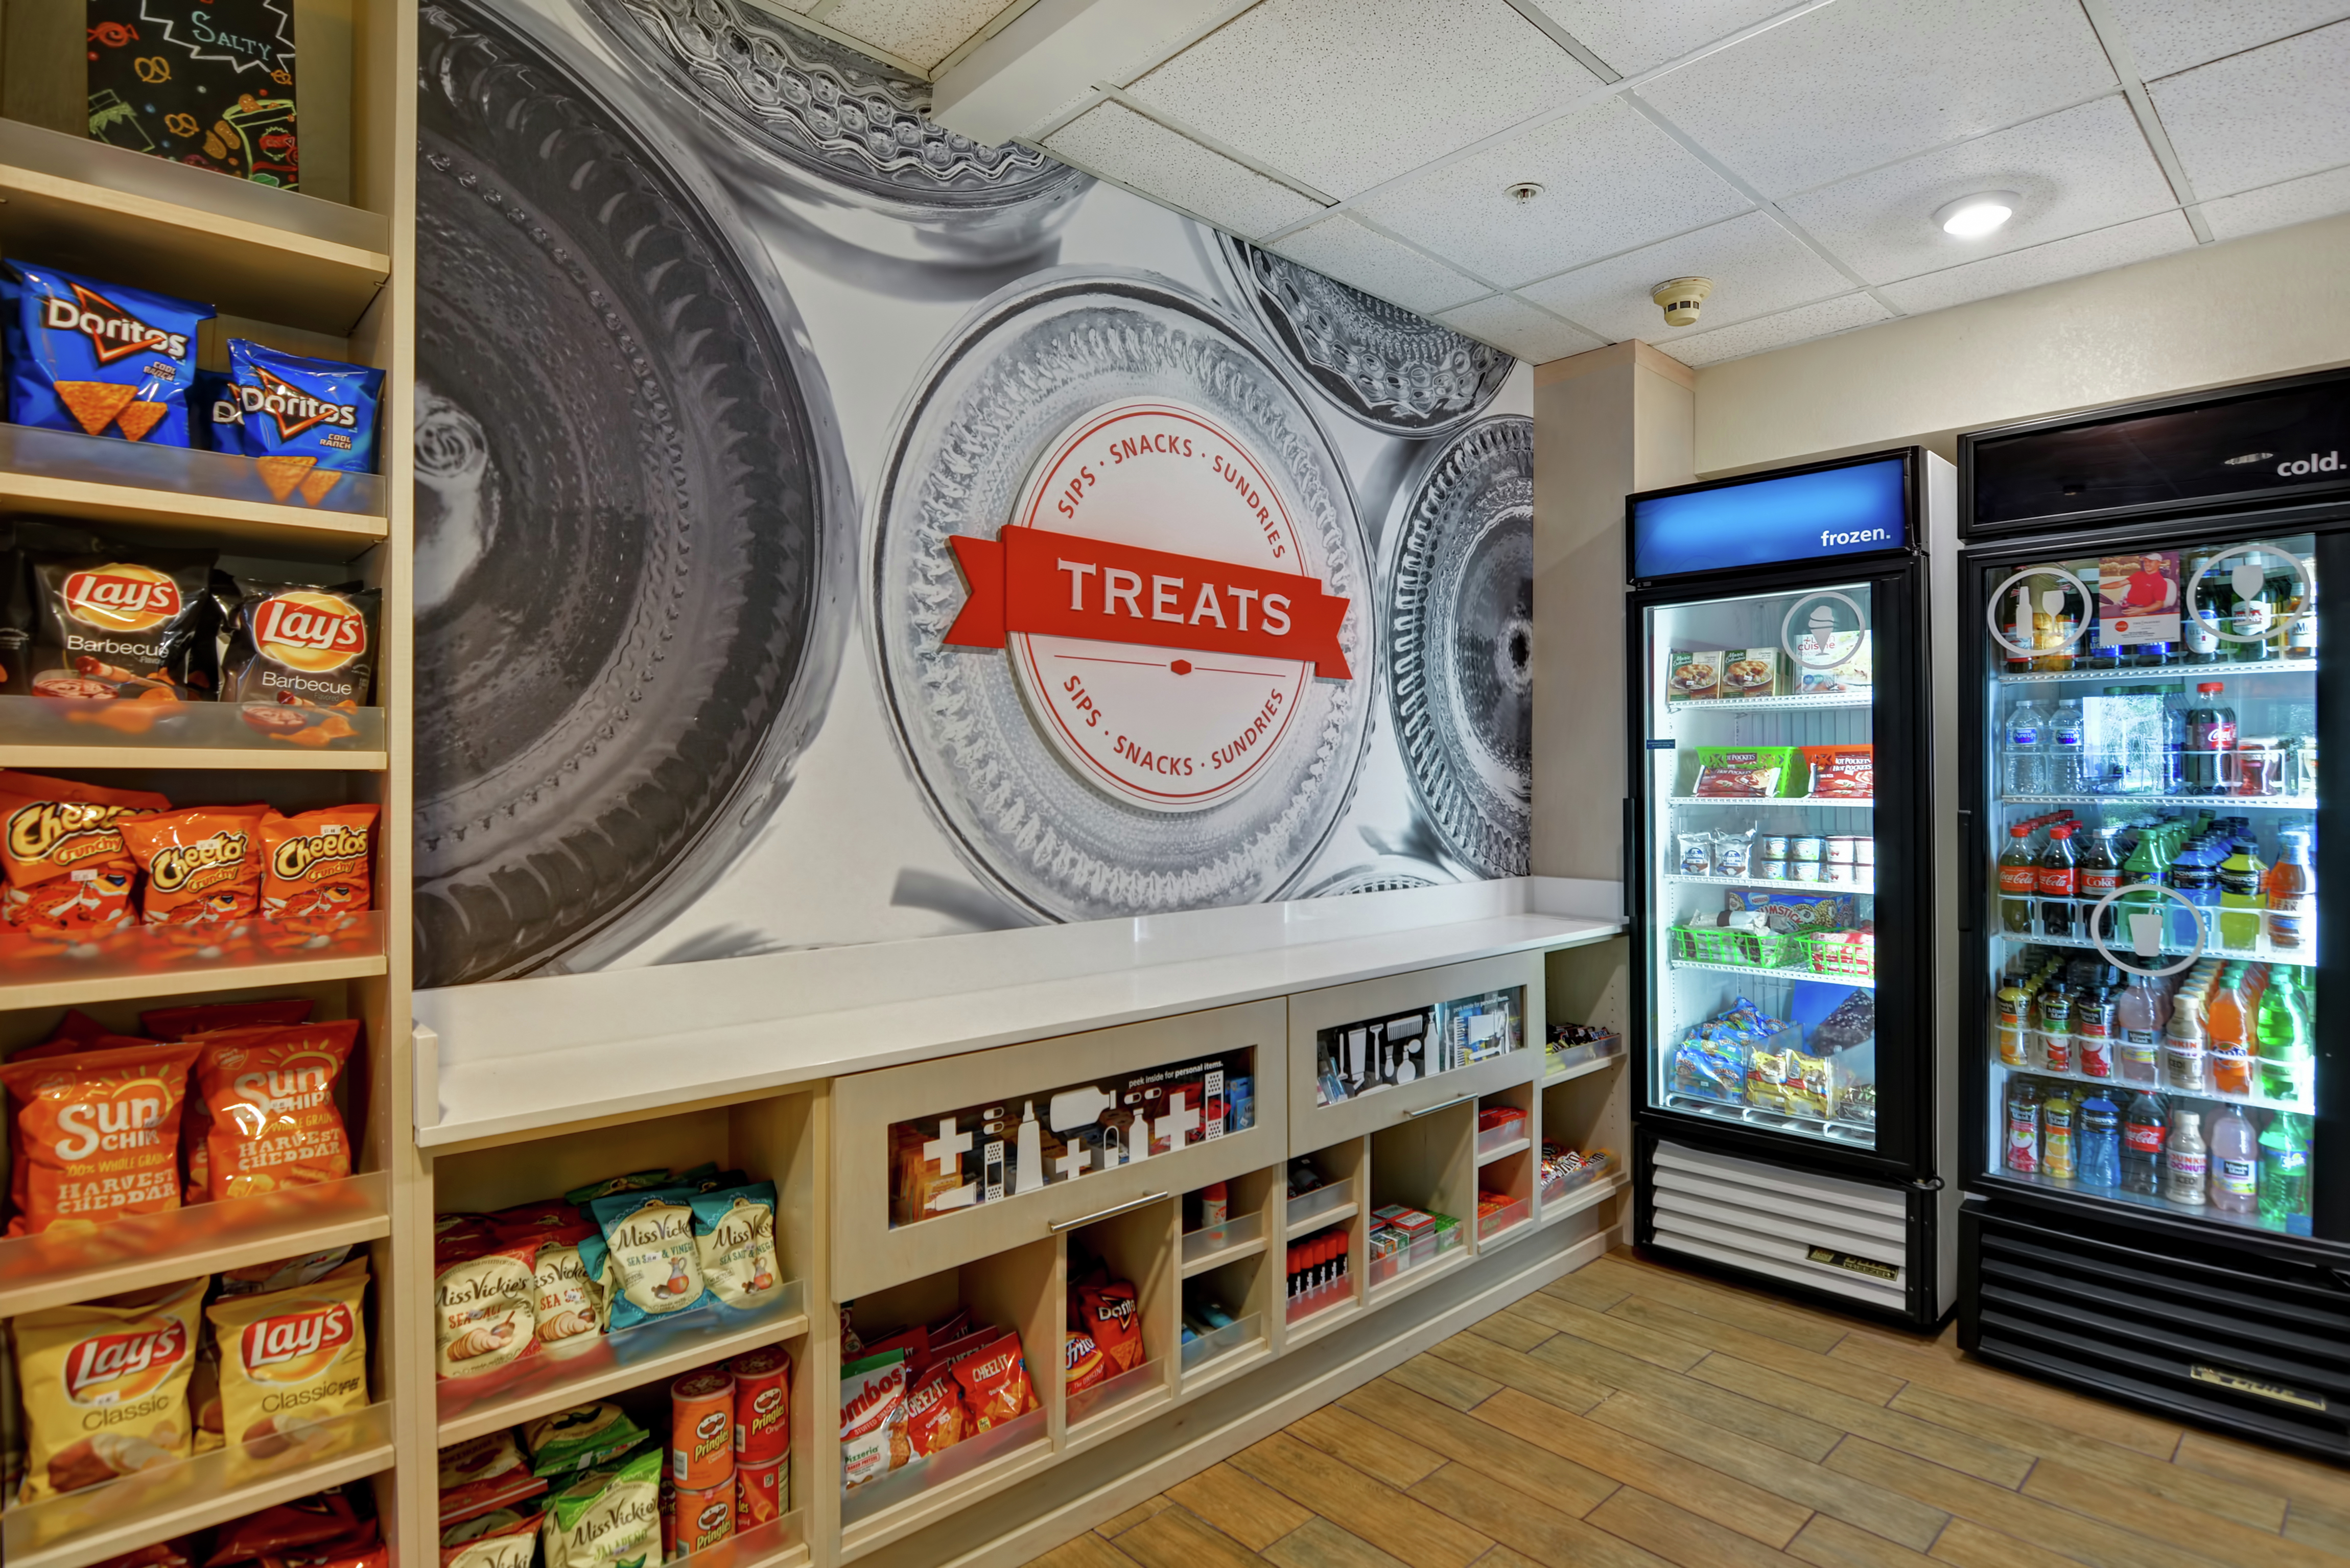 Treat Shop with Snacks and Cold Drinks